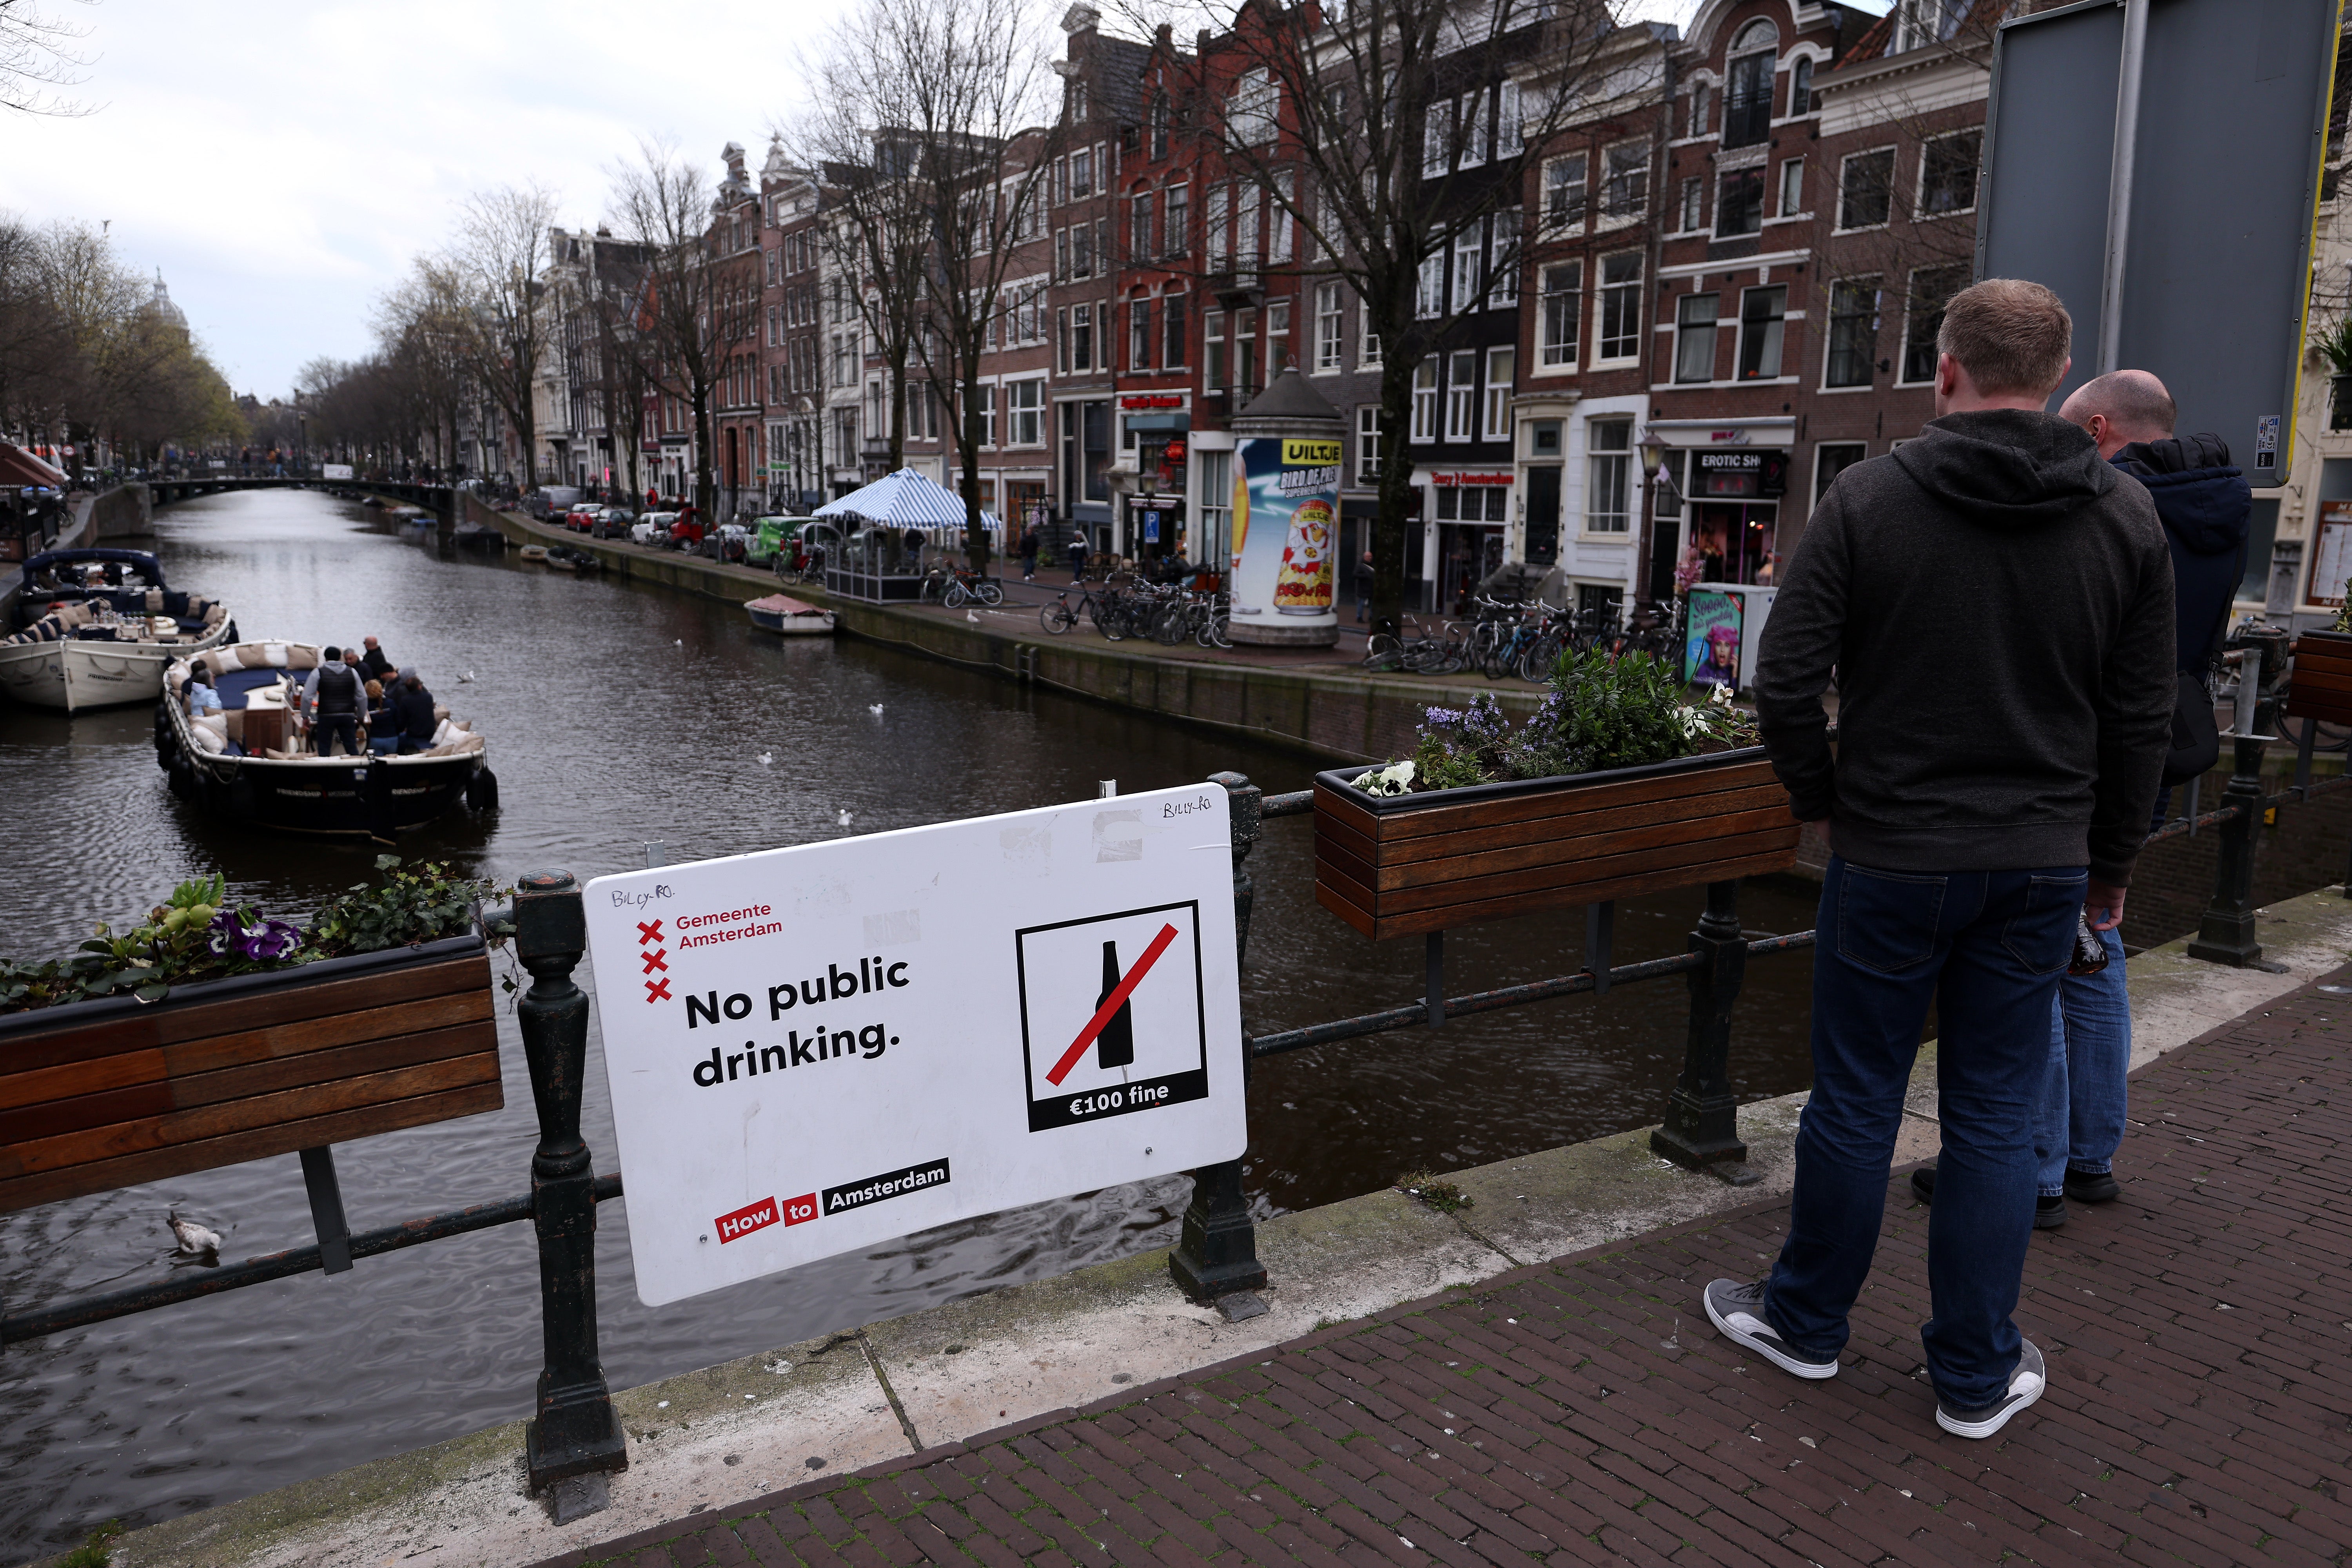 Signs in the Red Light District make the rules crystal clear